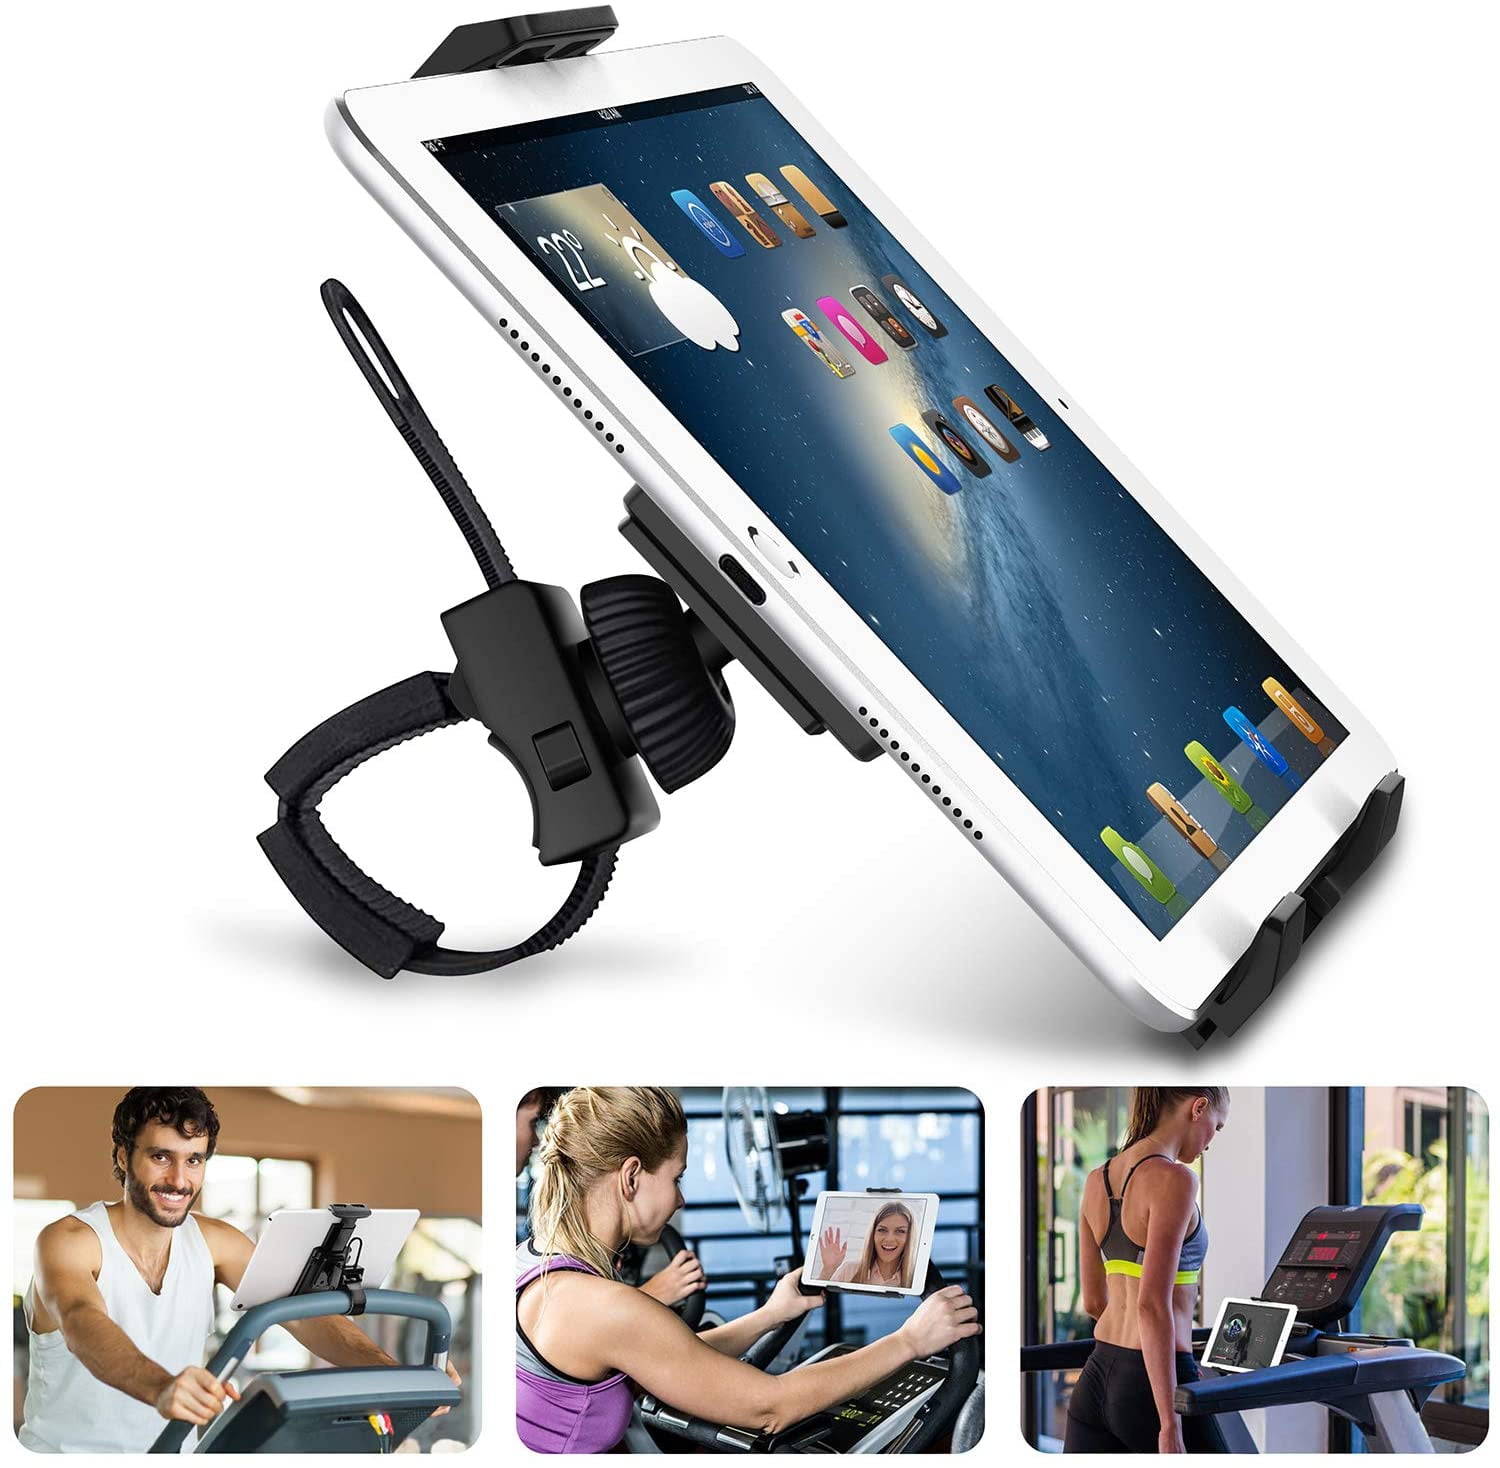 Tablet Holder, Mobile Phone Holder, Bike Can Be Rotated 360 ° For Home Trainer Cross Trainer / Bike / Gps Navigation Gym, Stand For Tablet / Iphone / Smartphone / Ipad (9-22 Cm) - Walmart.com